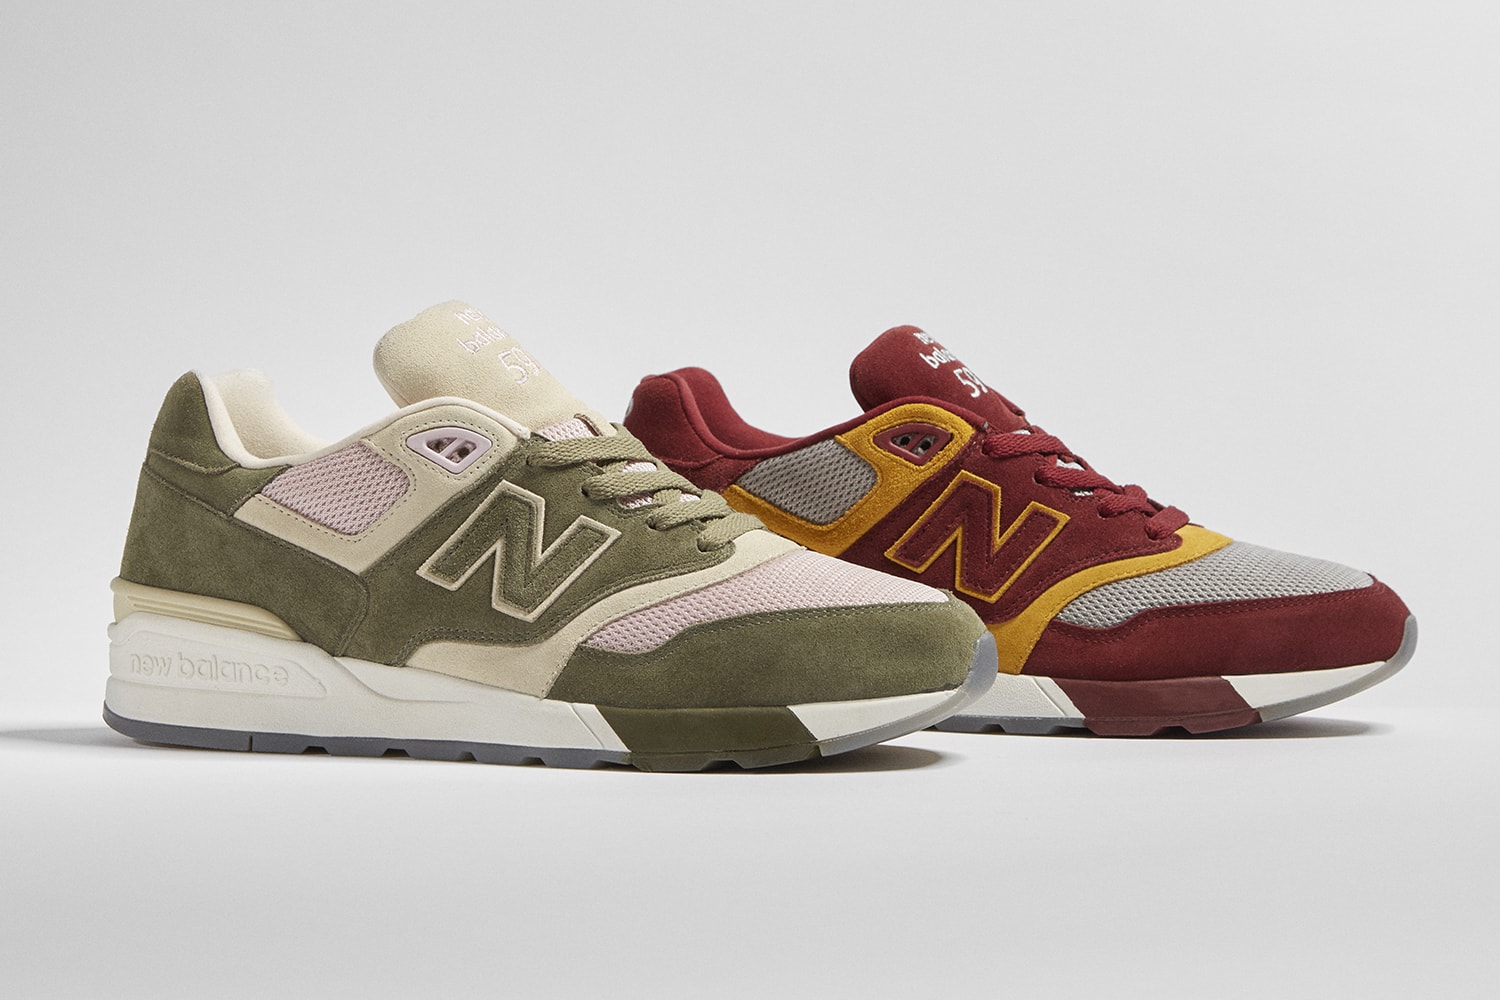 New Balance 597 Neotropic size Exclusive Green Beige Off White Red Yellow Gold Grey 2017 September 22 Release Date Info Sneakers Shoes Footwear September 22